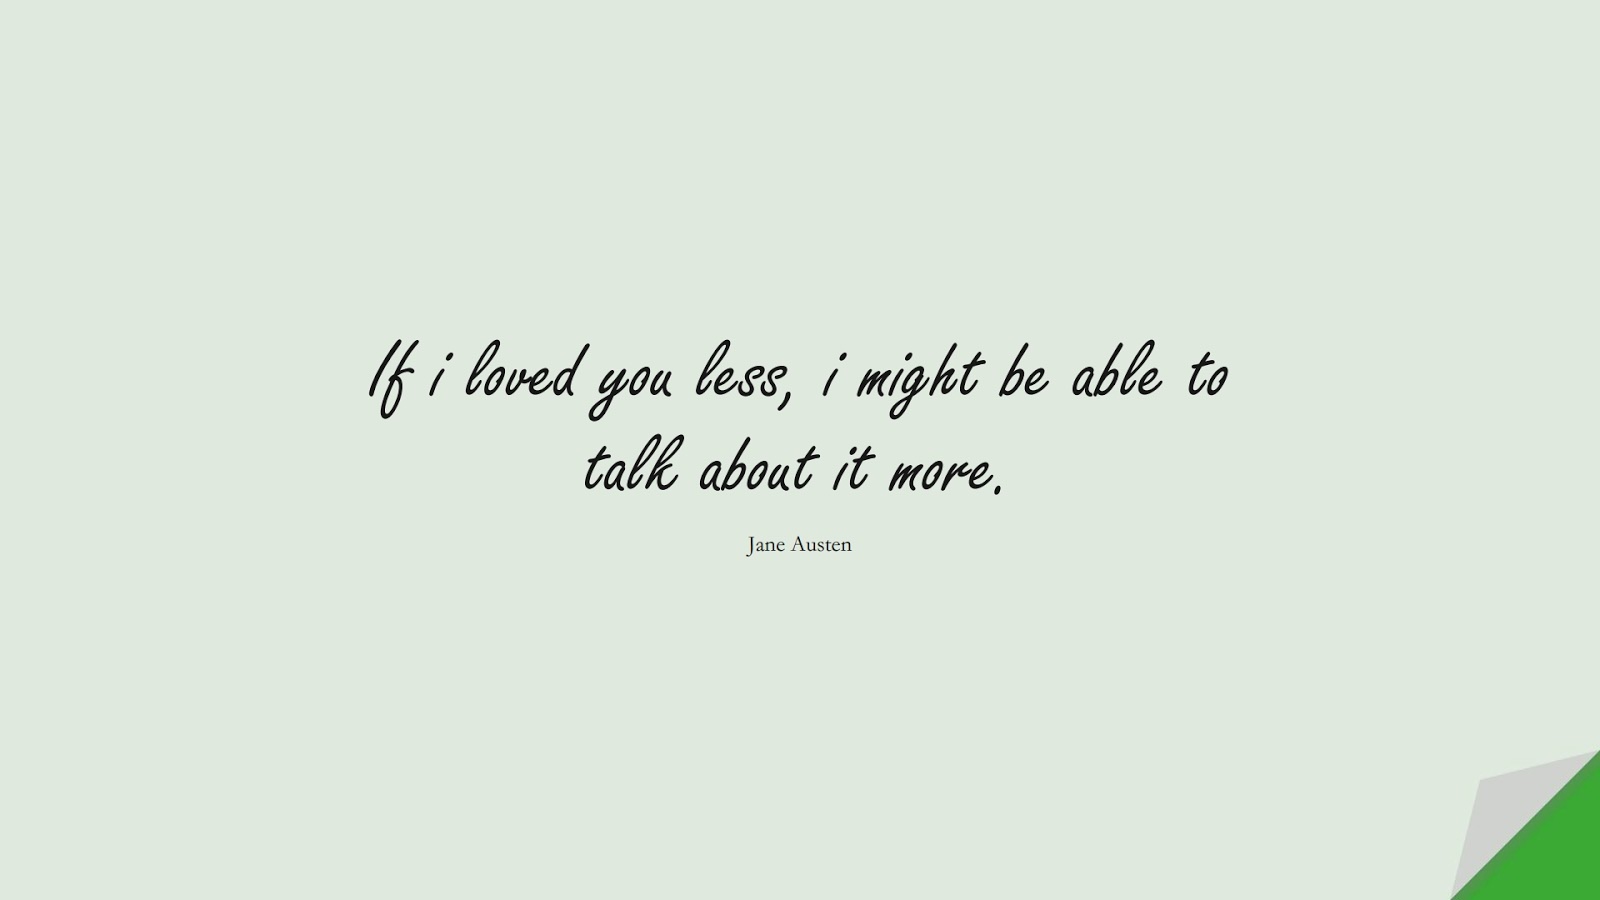 If i loved you less, i might be able to talk about it more. (Jane Austen);  #LoveQuotes